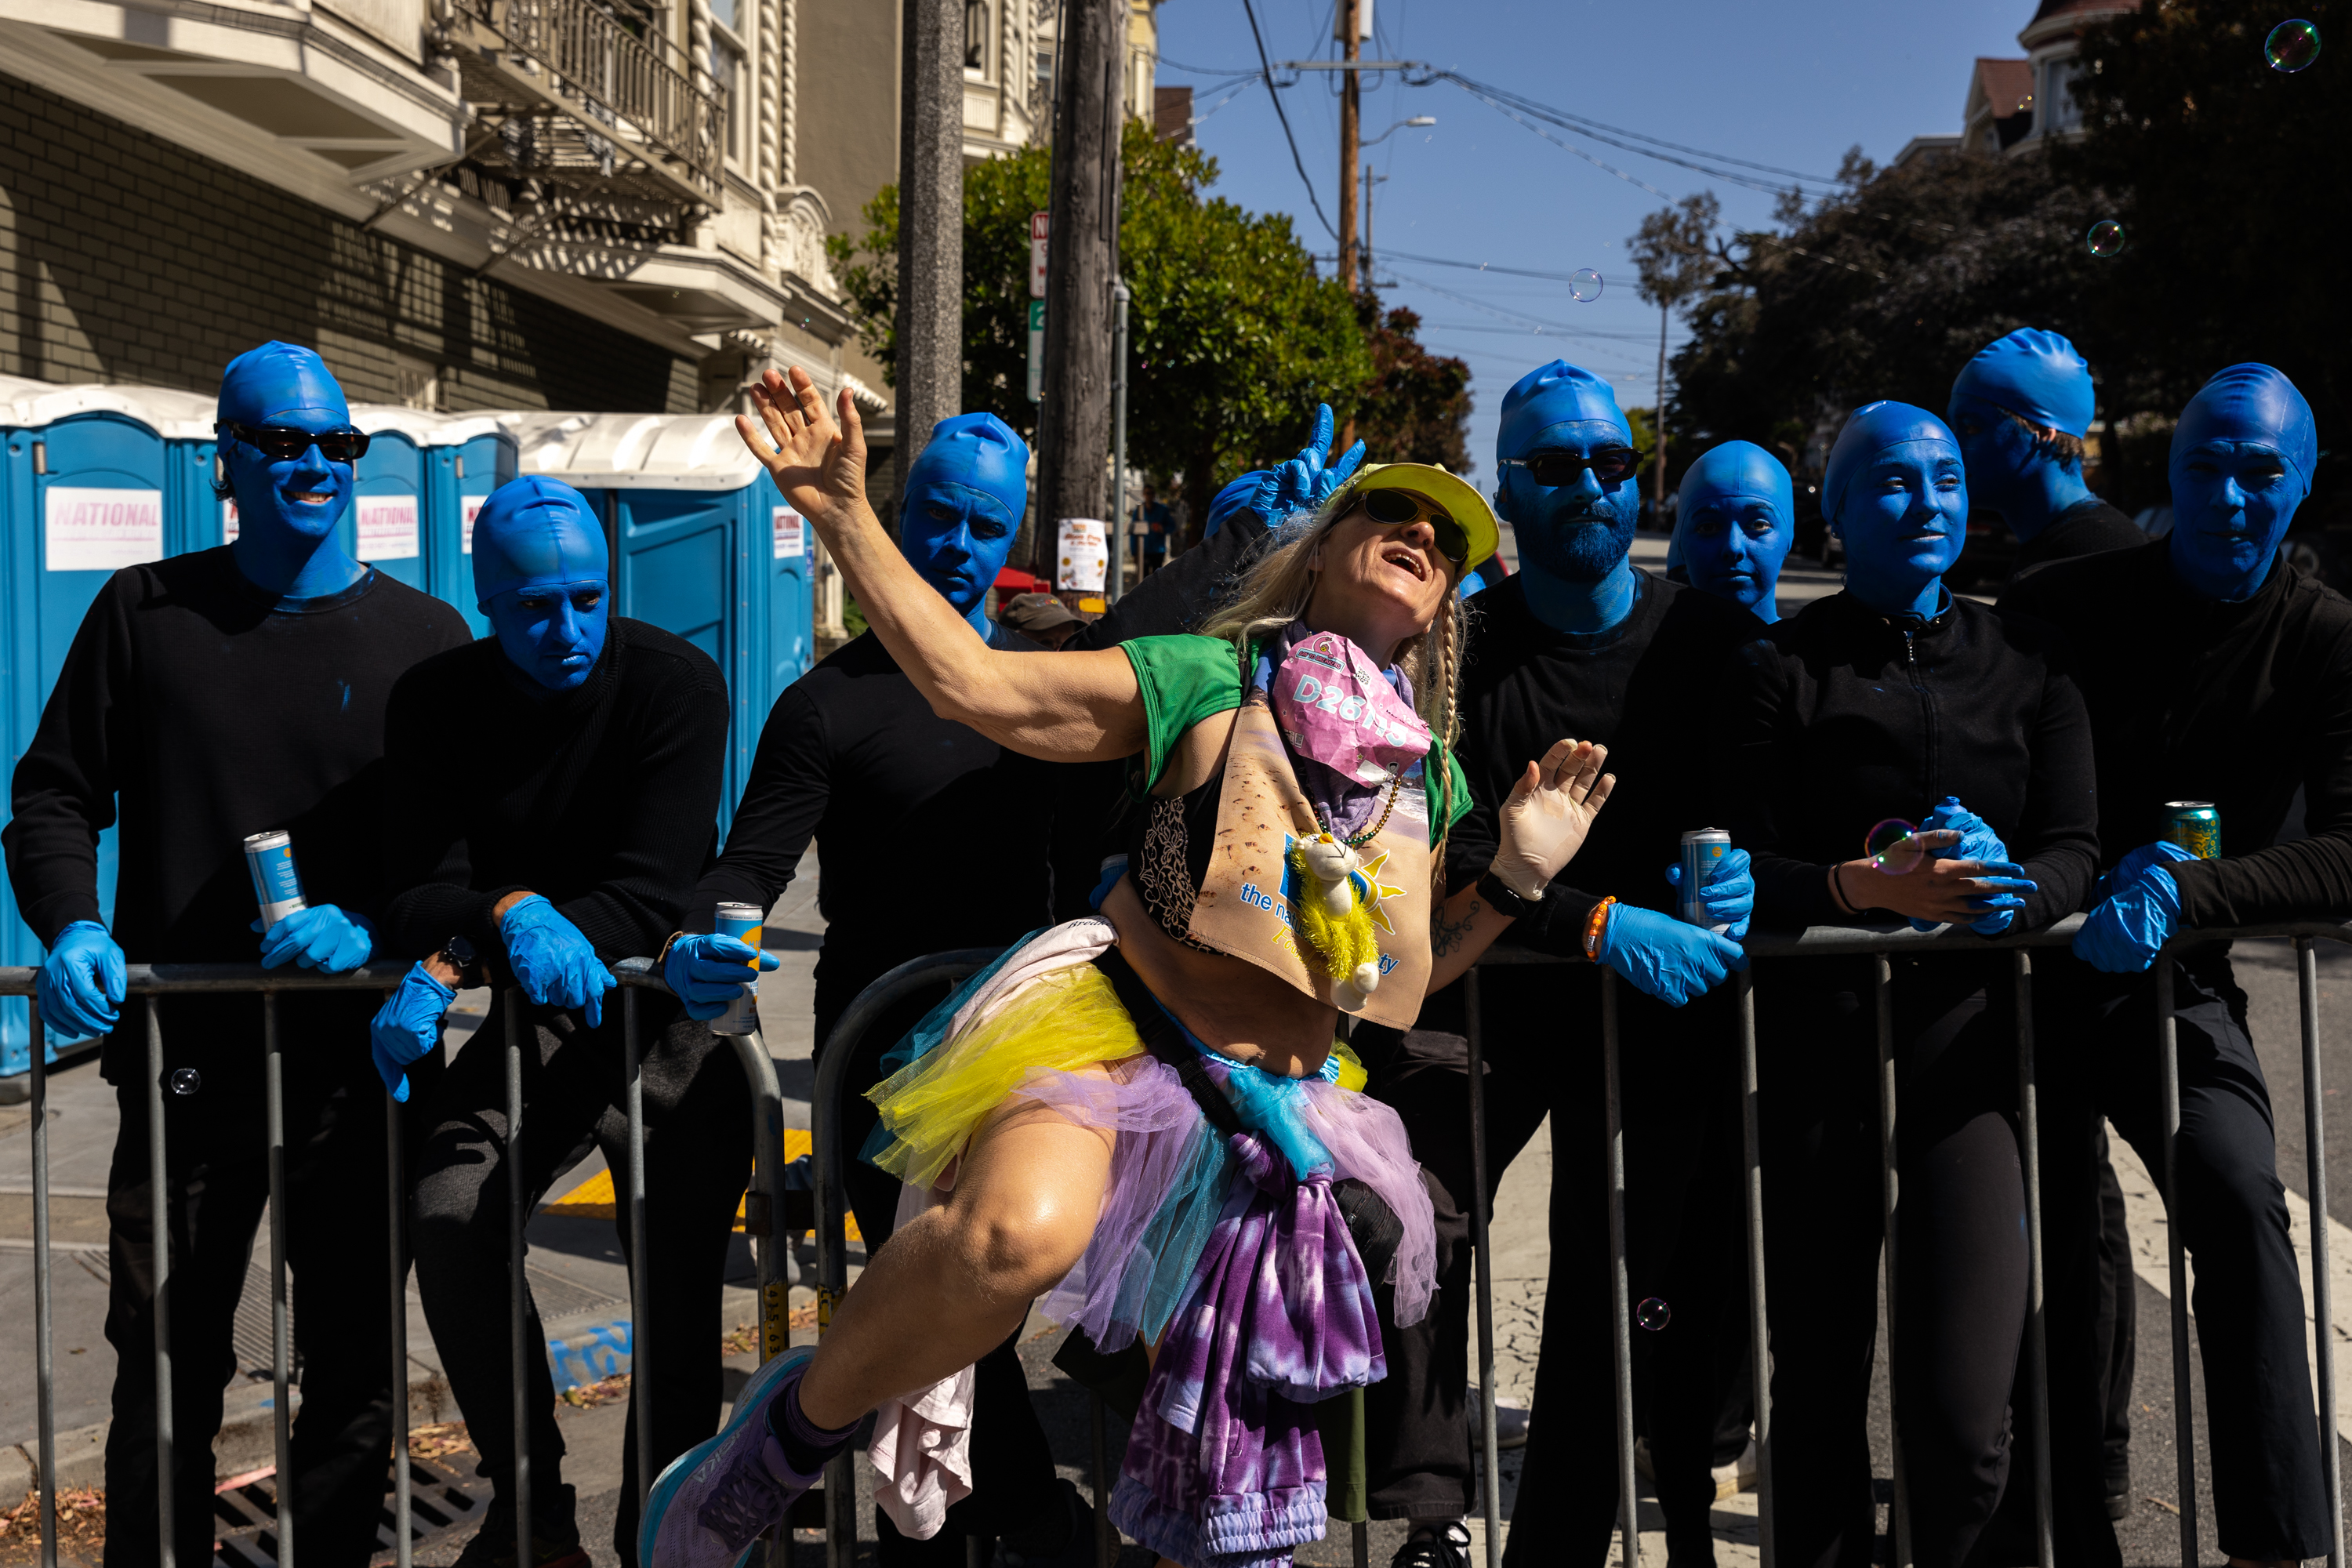 A woman in a colorful tutu dances jubilantly near blue-painted performers resembling Blue Man Group, who are behind a barricade.